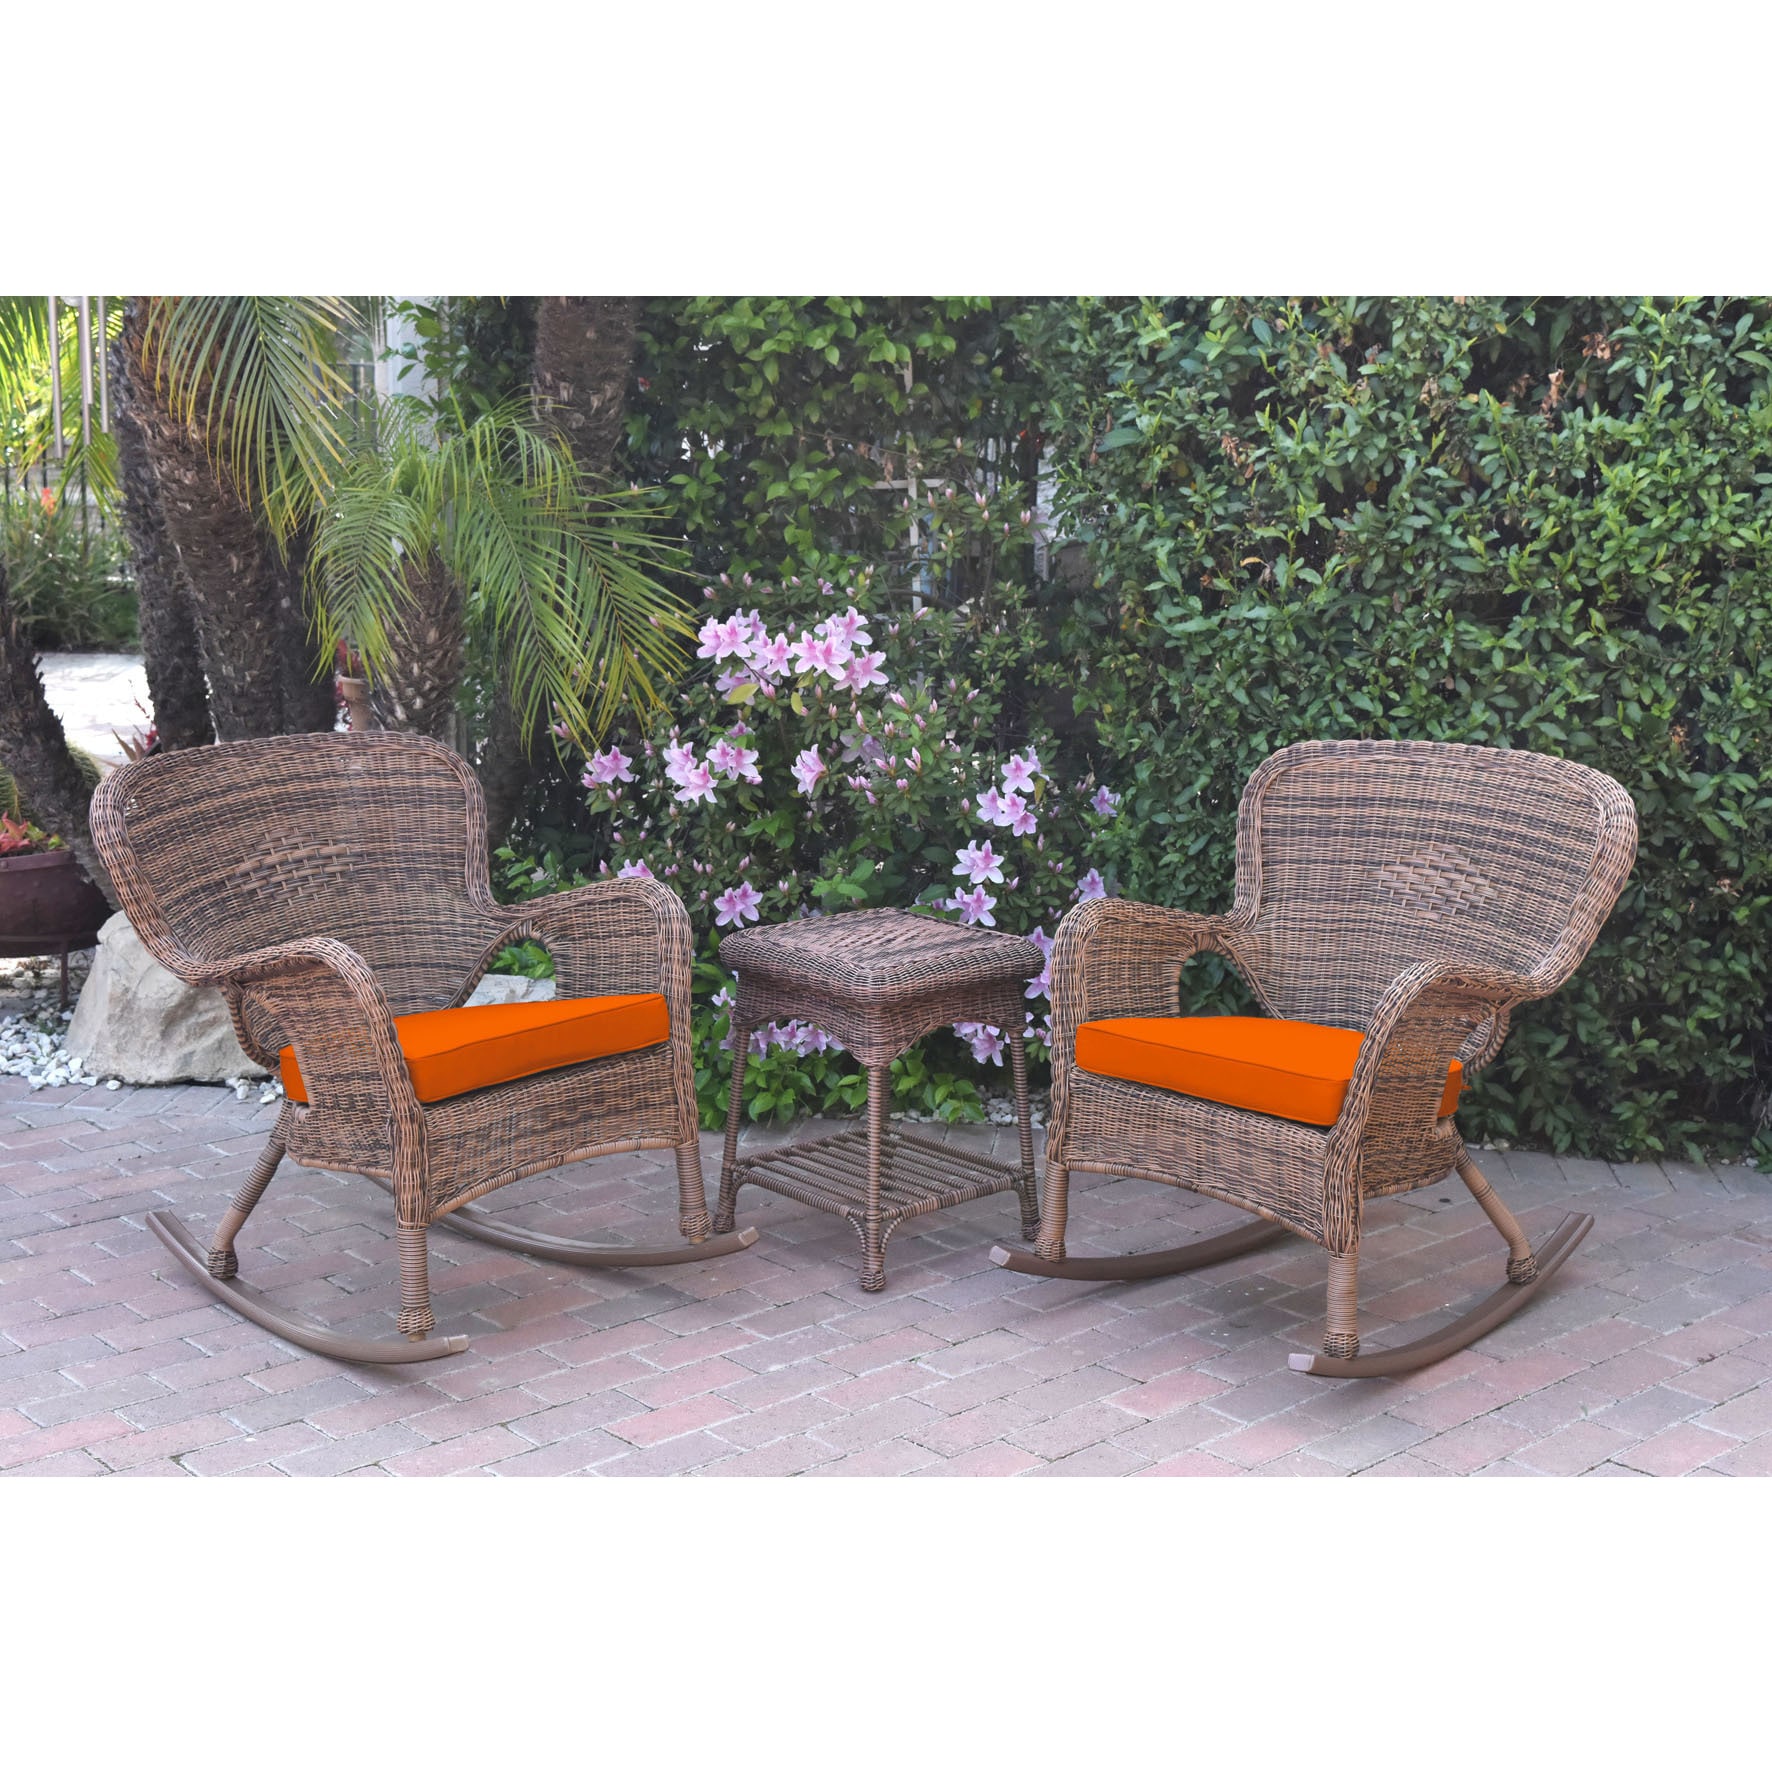 Jeco Windsor Honey Wicker Rocker Chair And End Table Set With Cushions